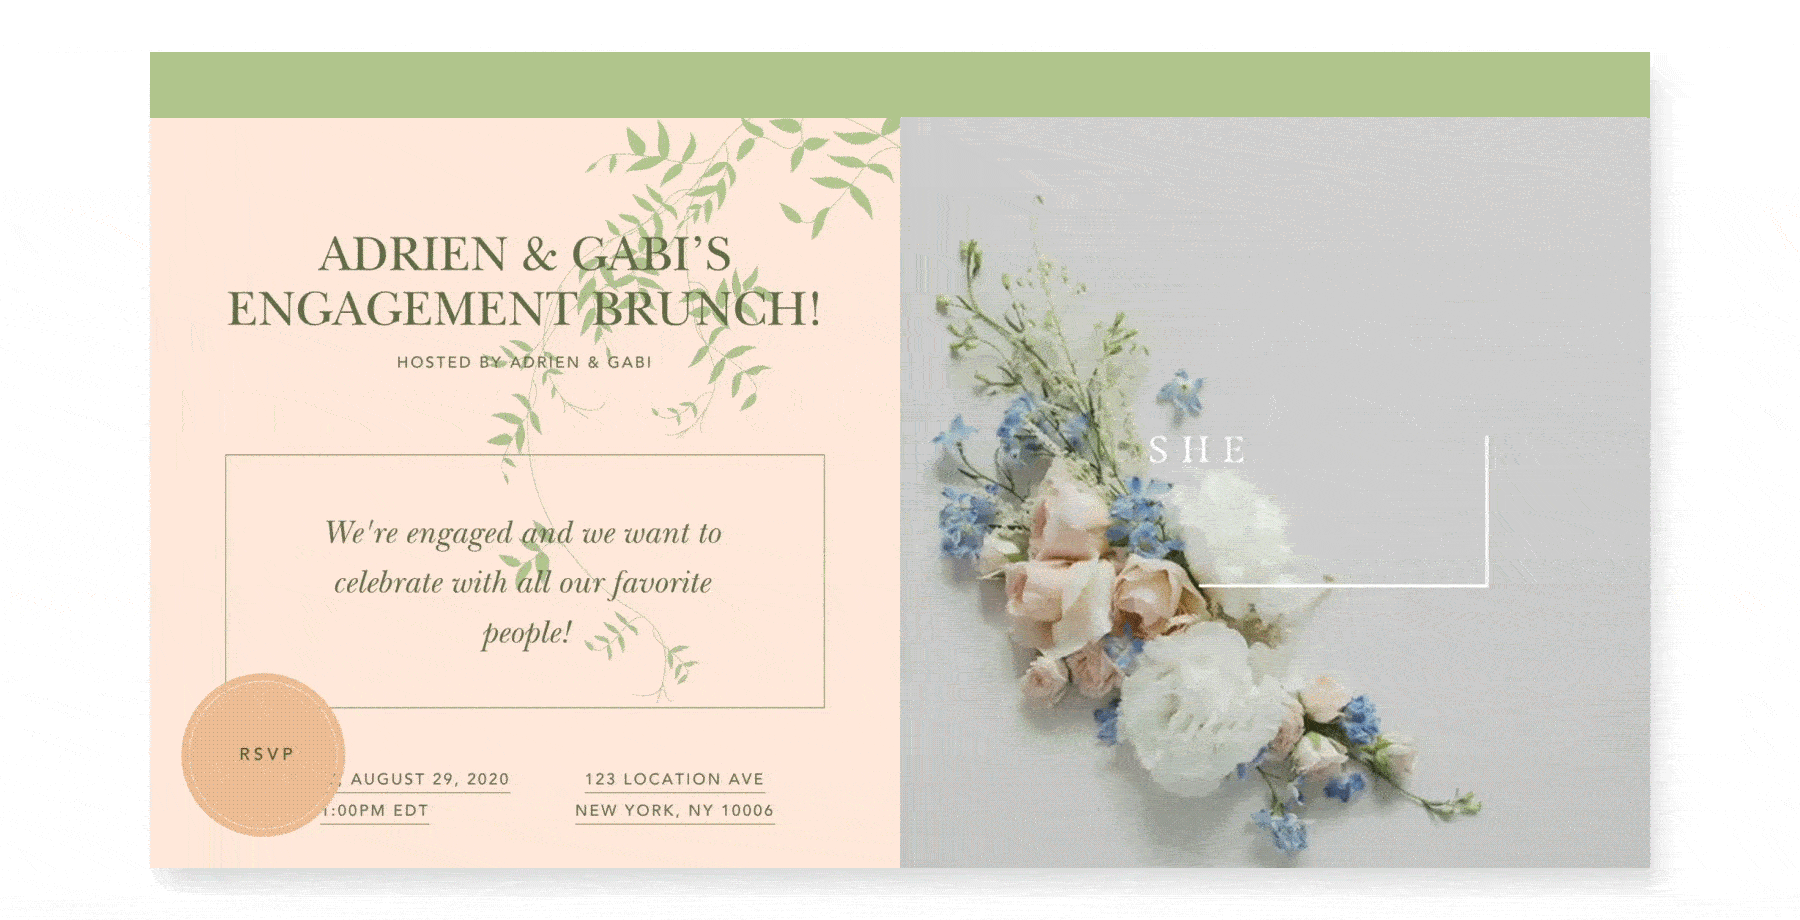 Engagement party Flyer invitation with an animated floral background.